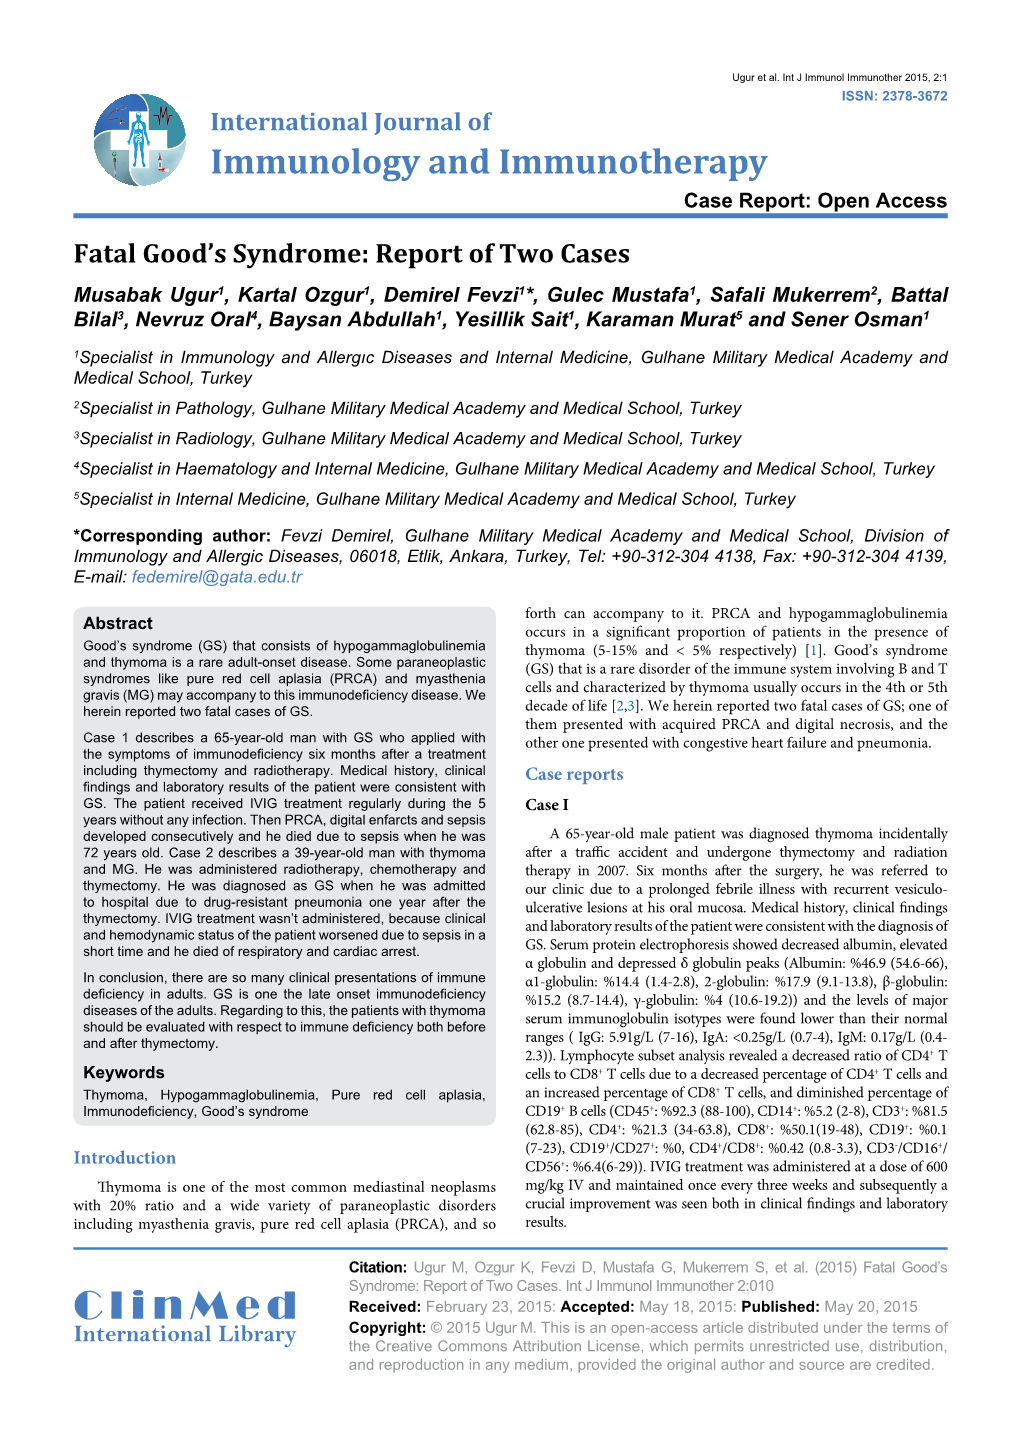 Fatal Good's Syndrome: Report of Two Cases